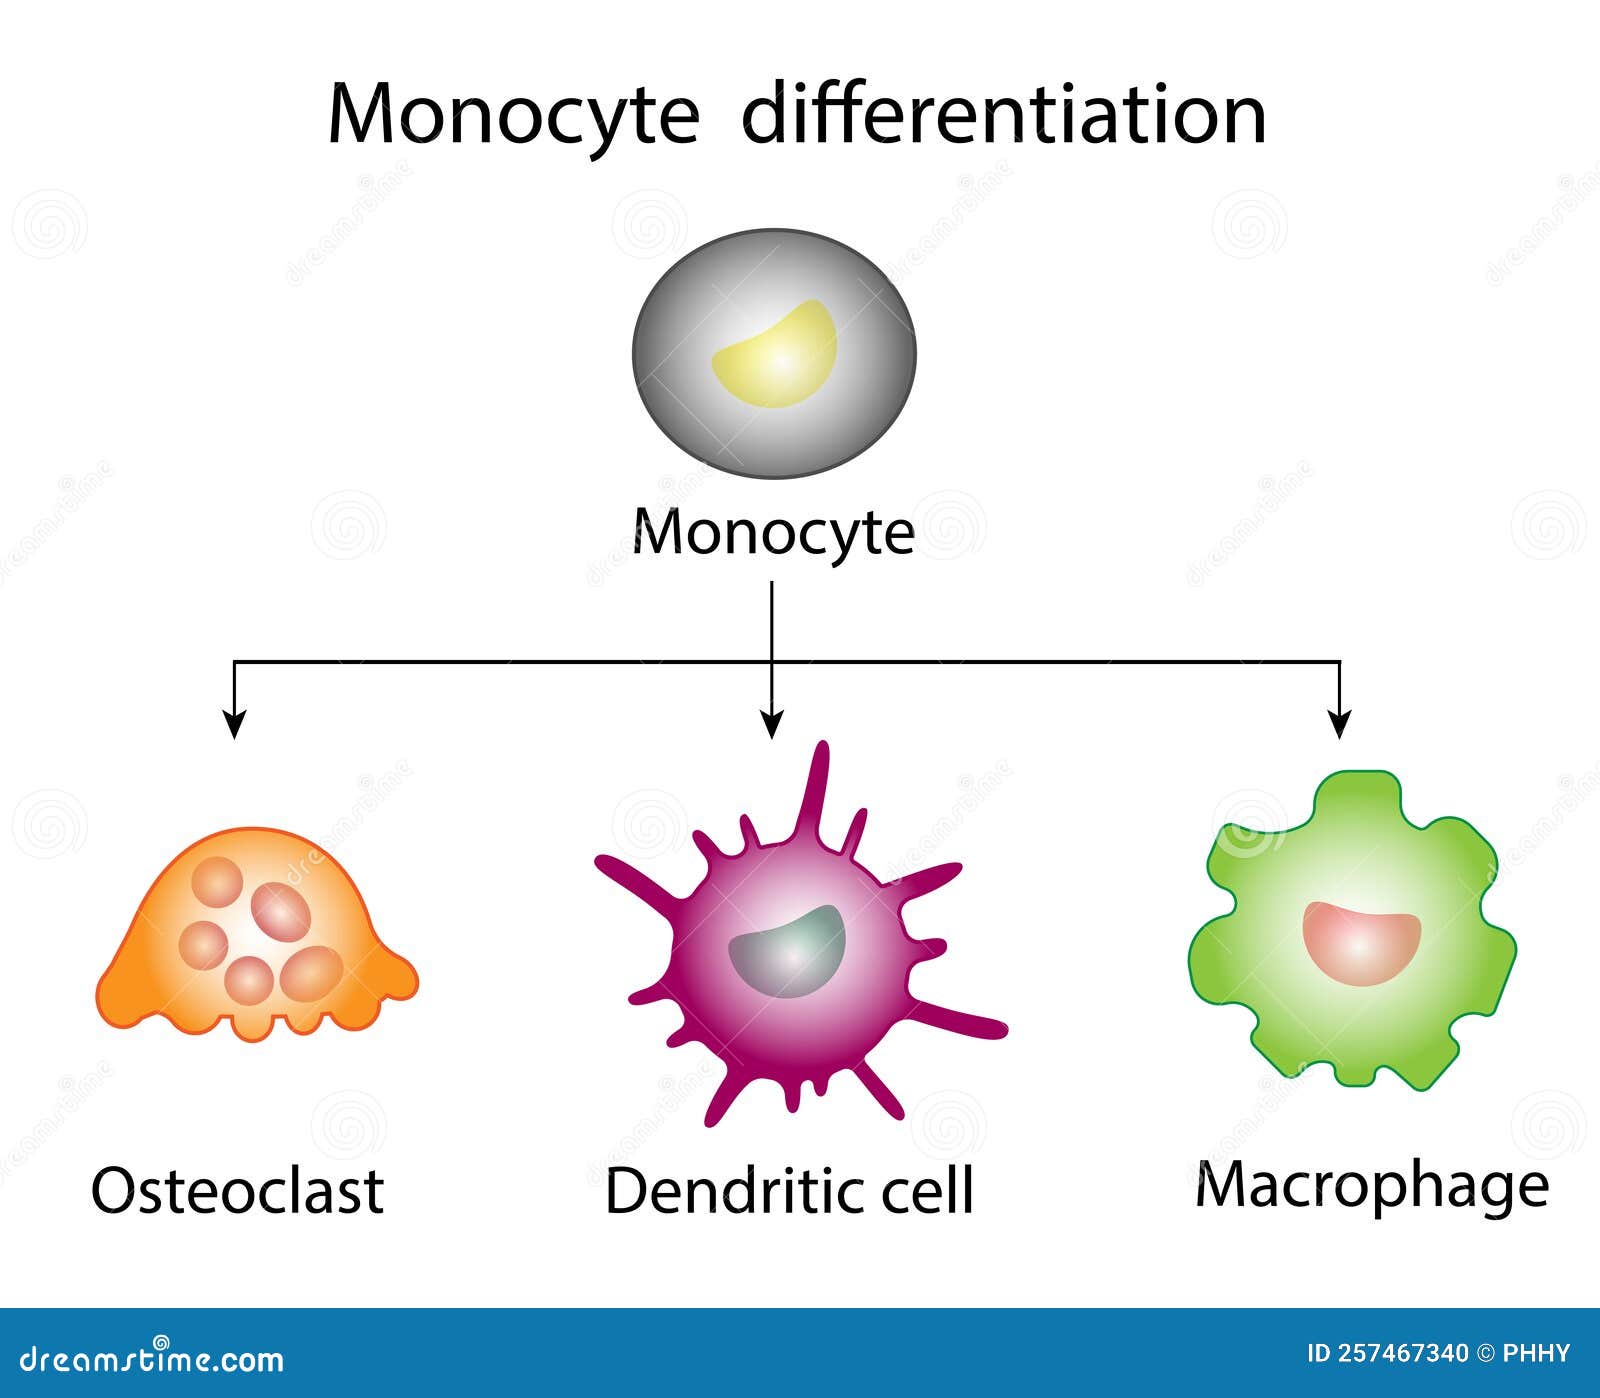 monocyte differentiation. dendritic cell, osteoclast and macrophage.